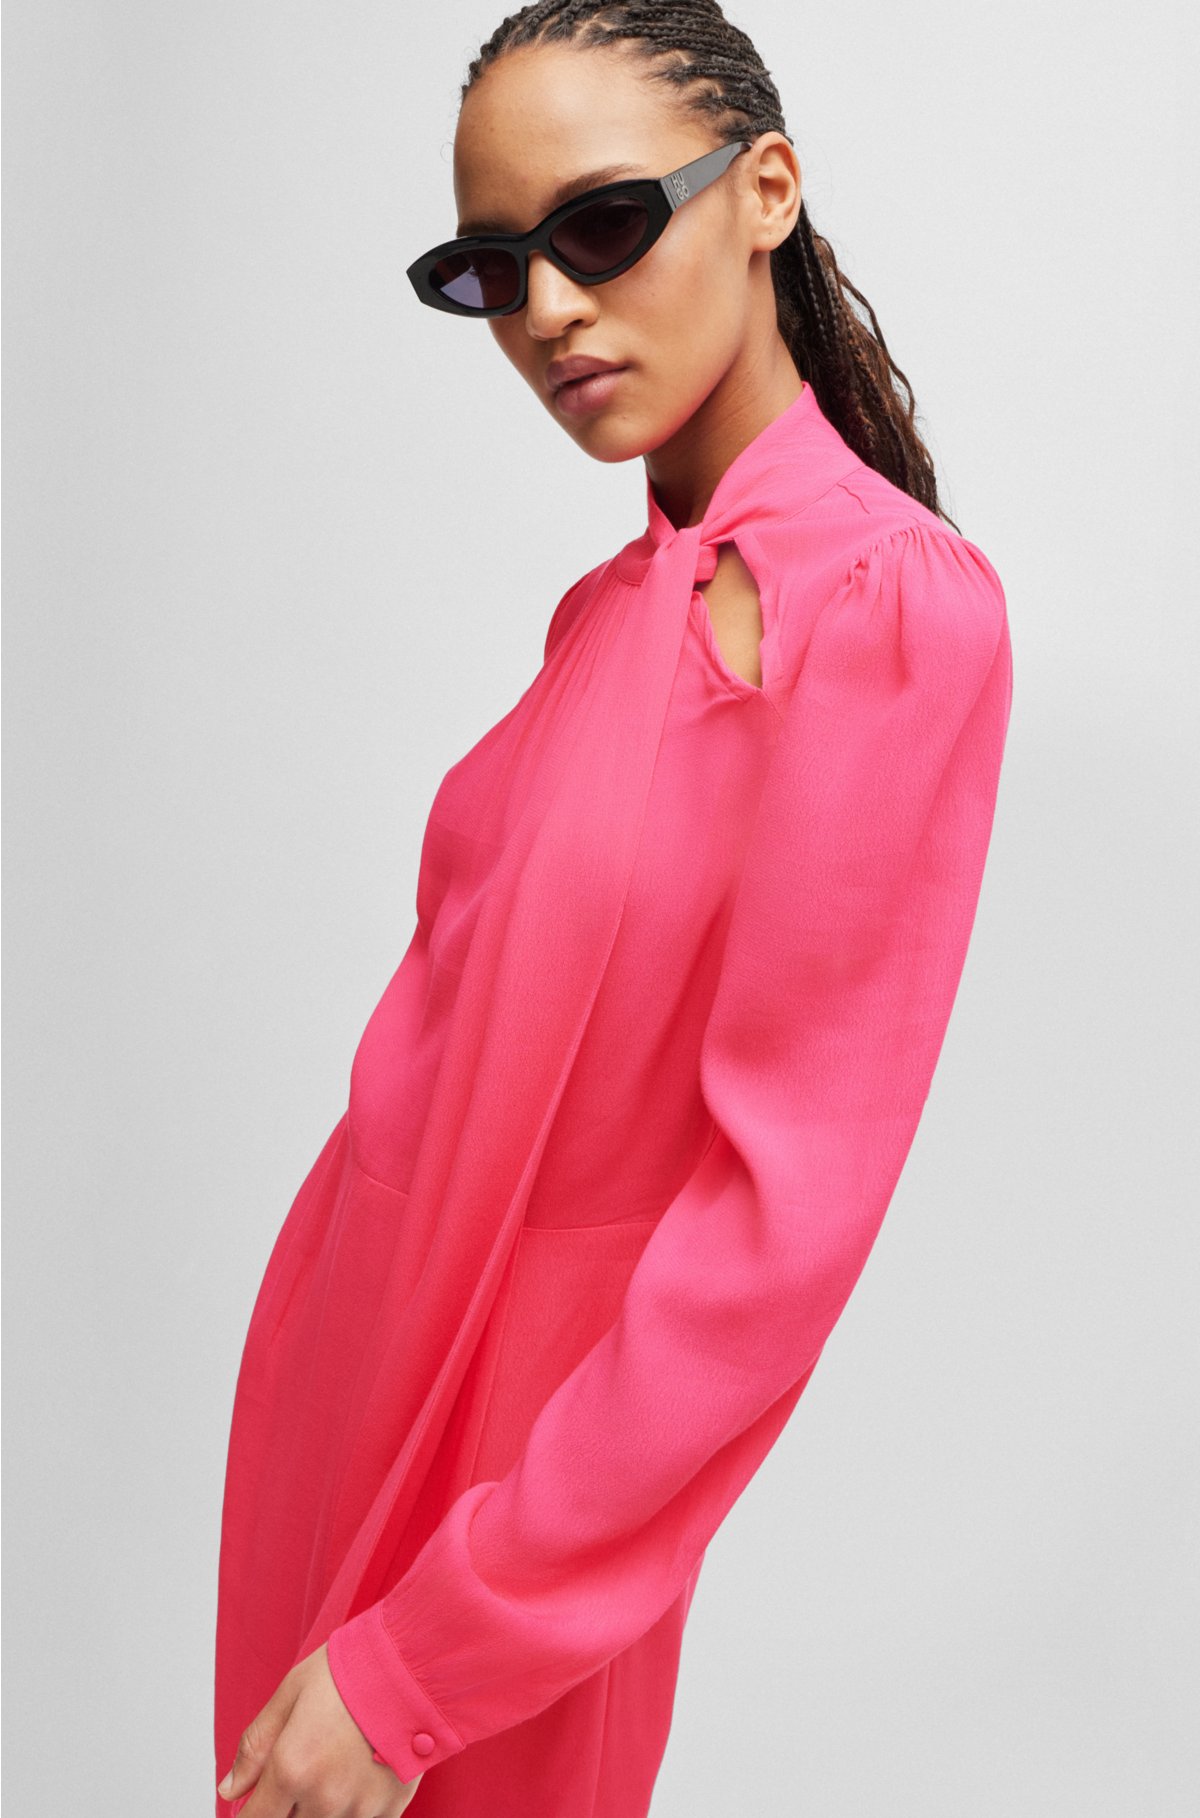 Long-sleeved dress in crepe fabric with bow neckline, Pink